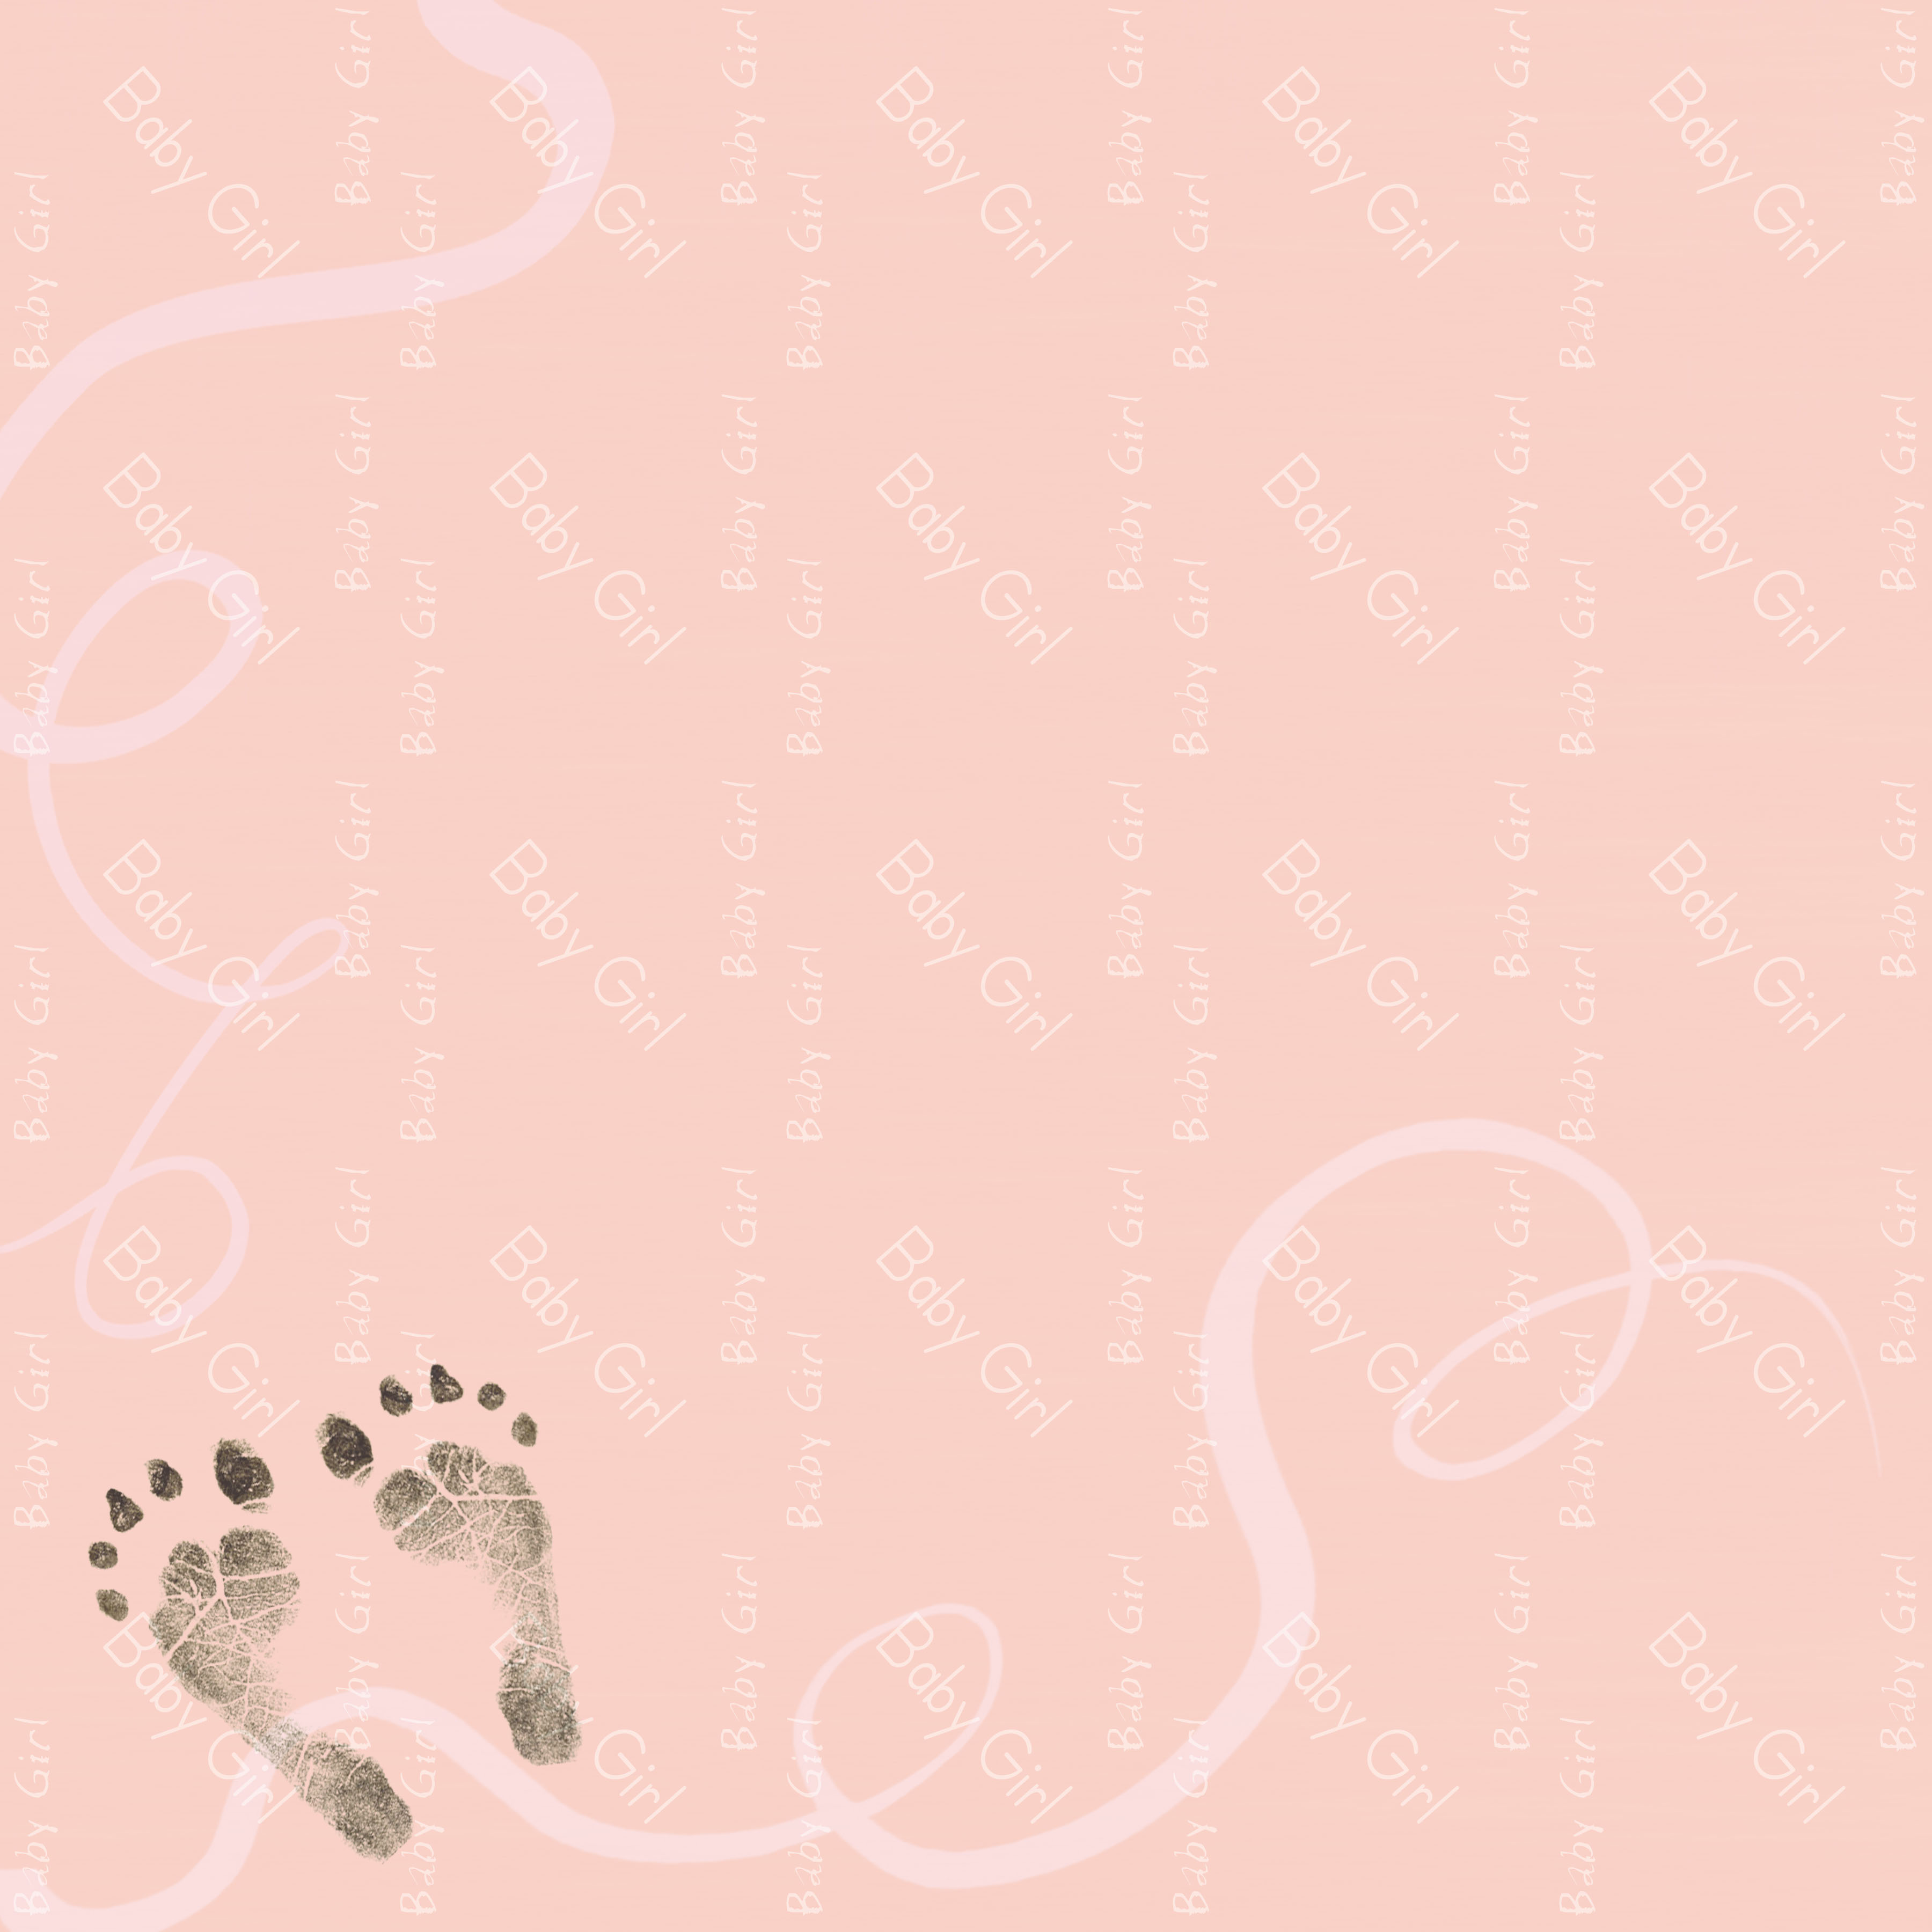 Baby Photo Background - Widescreen HD Backgrounds